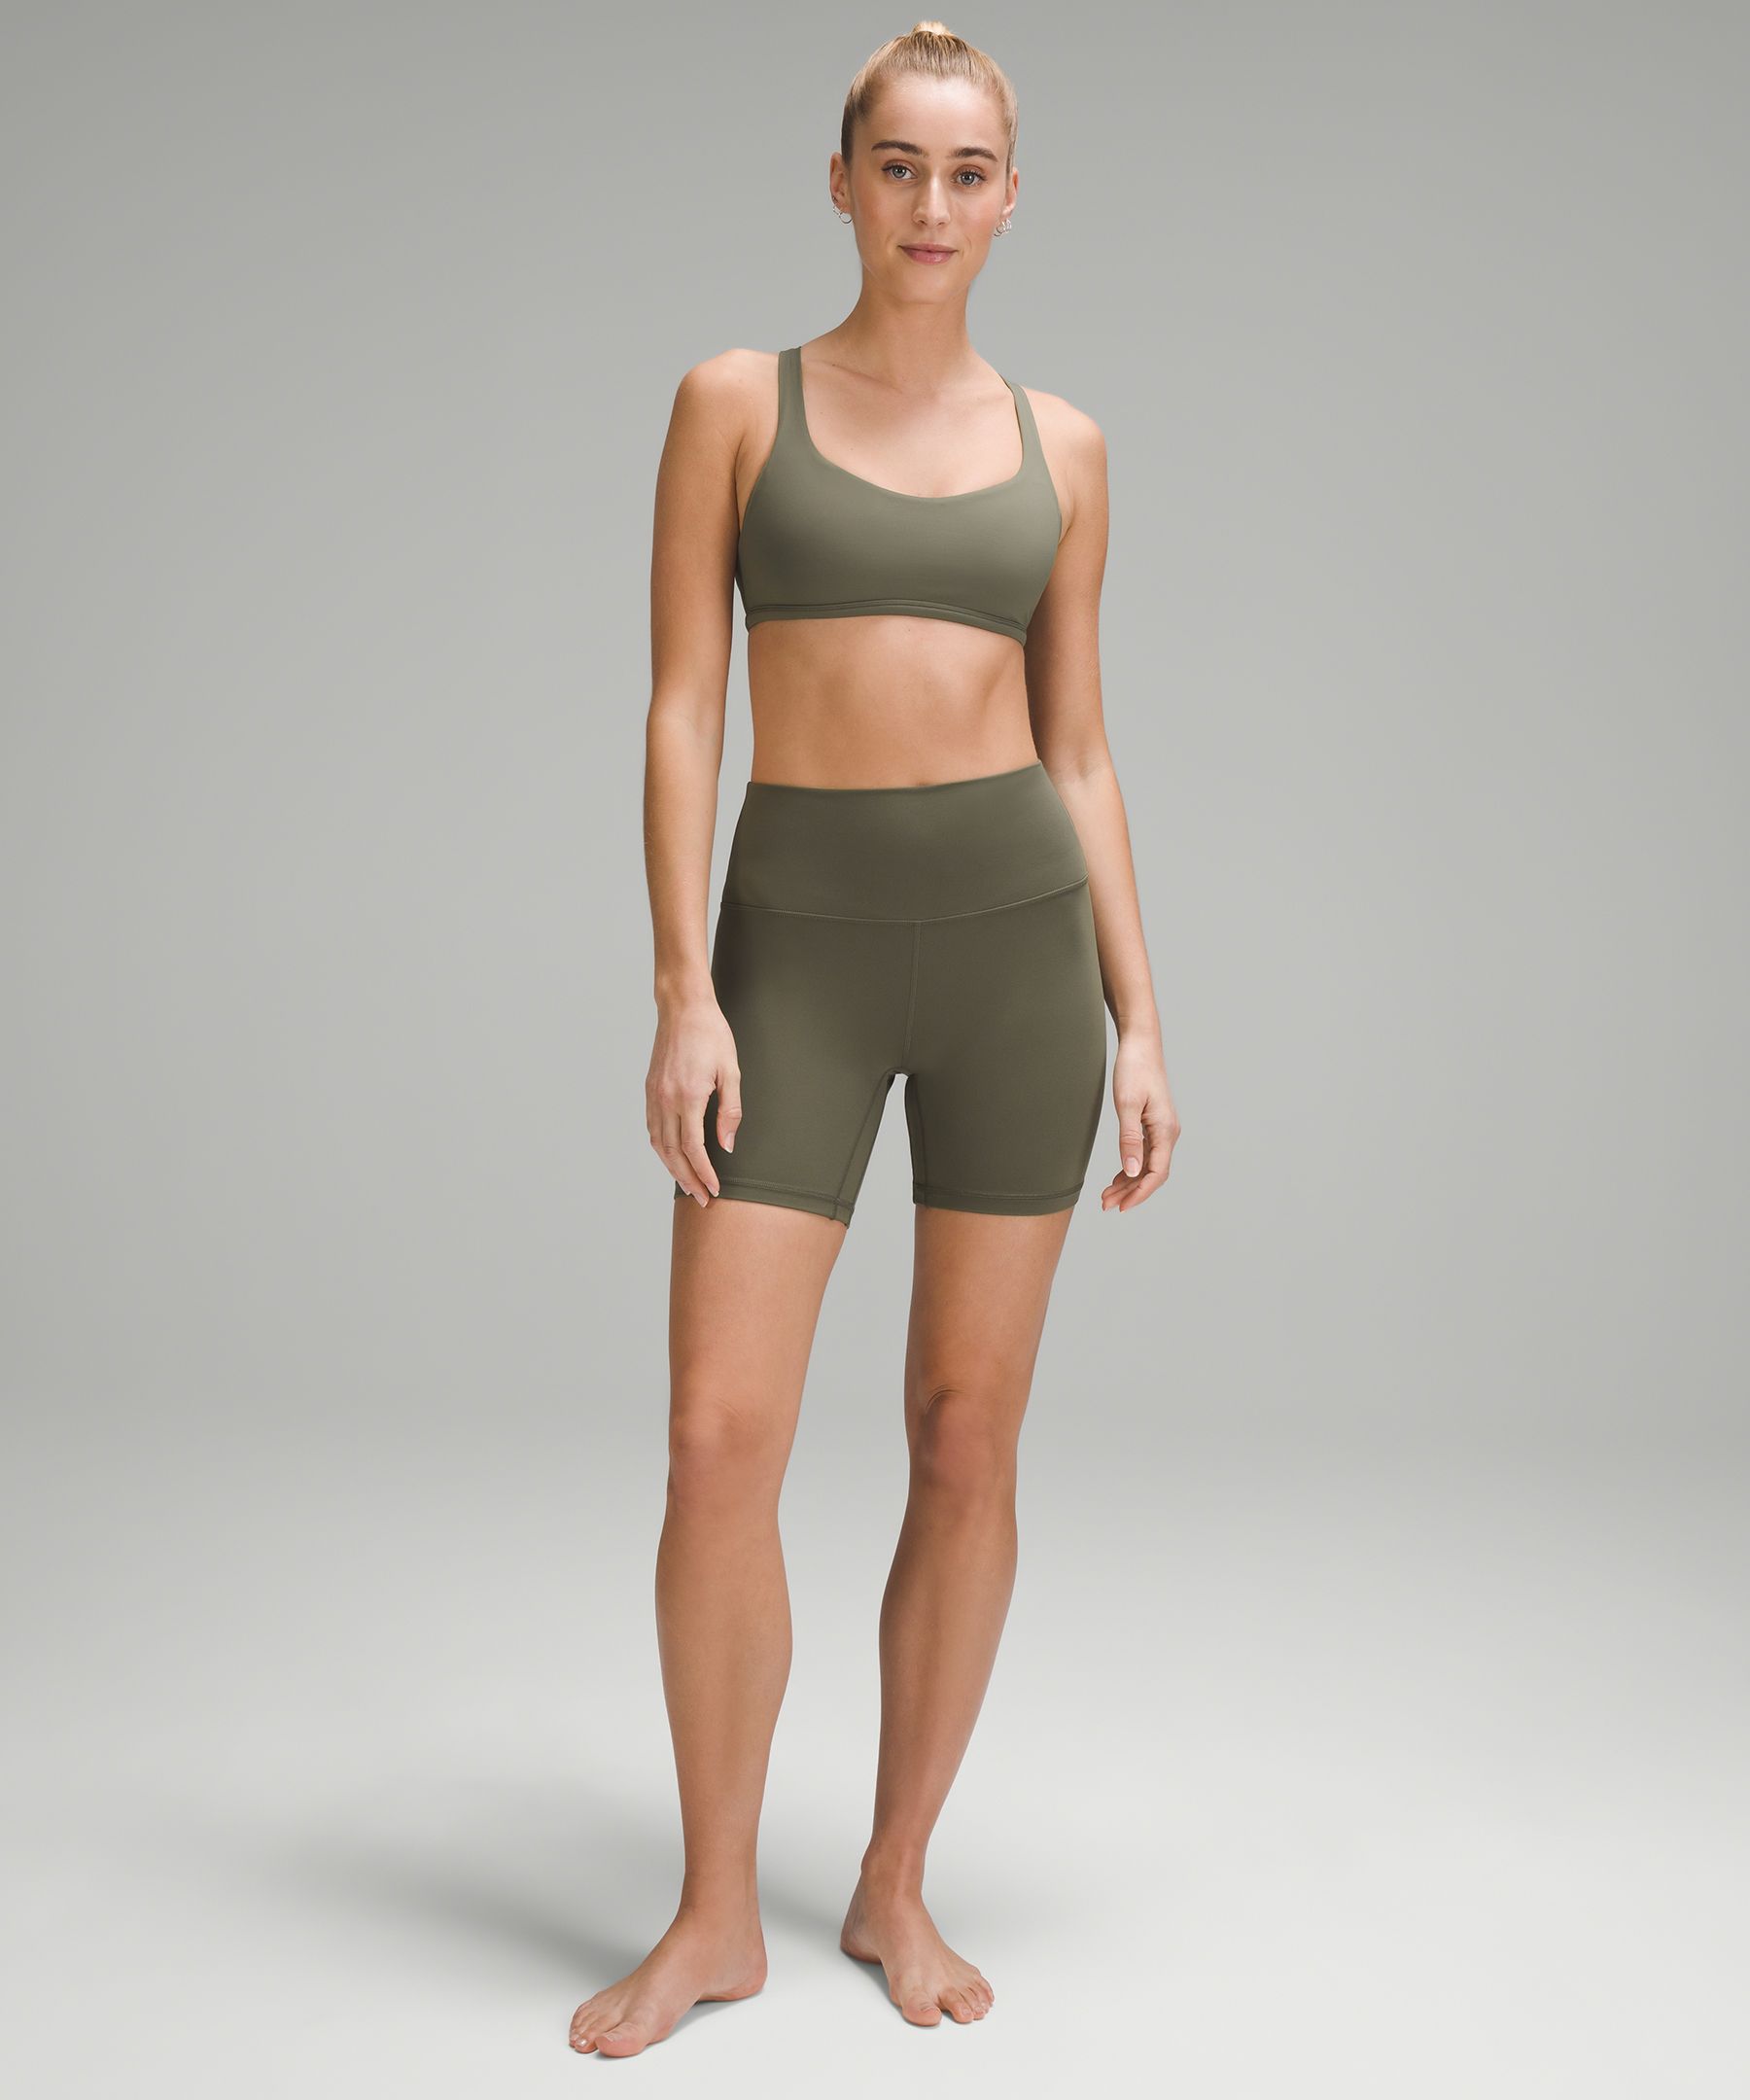 Leg day outfit! Flow Y bra in black (6) and Align shorts hemmed to 5” (6).  : r/lululemon